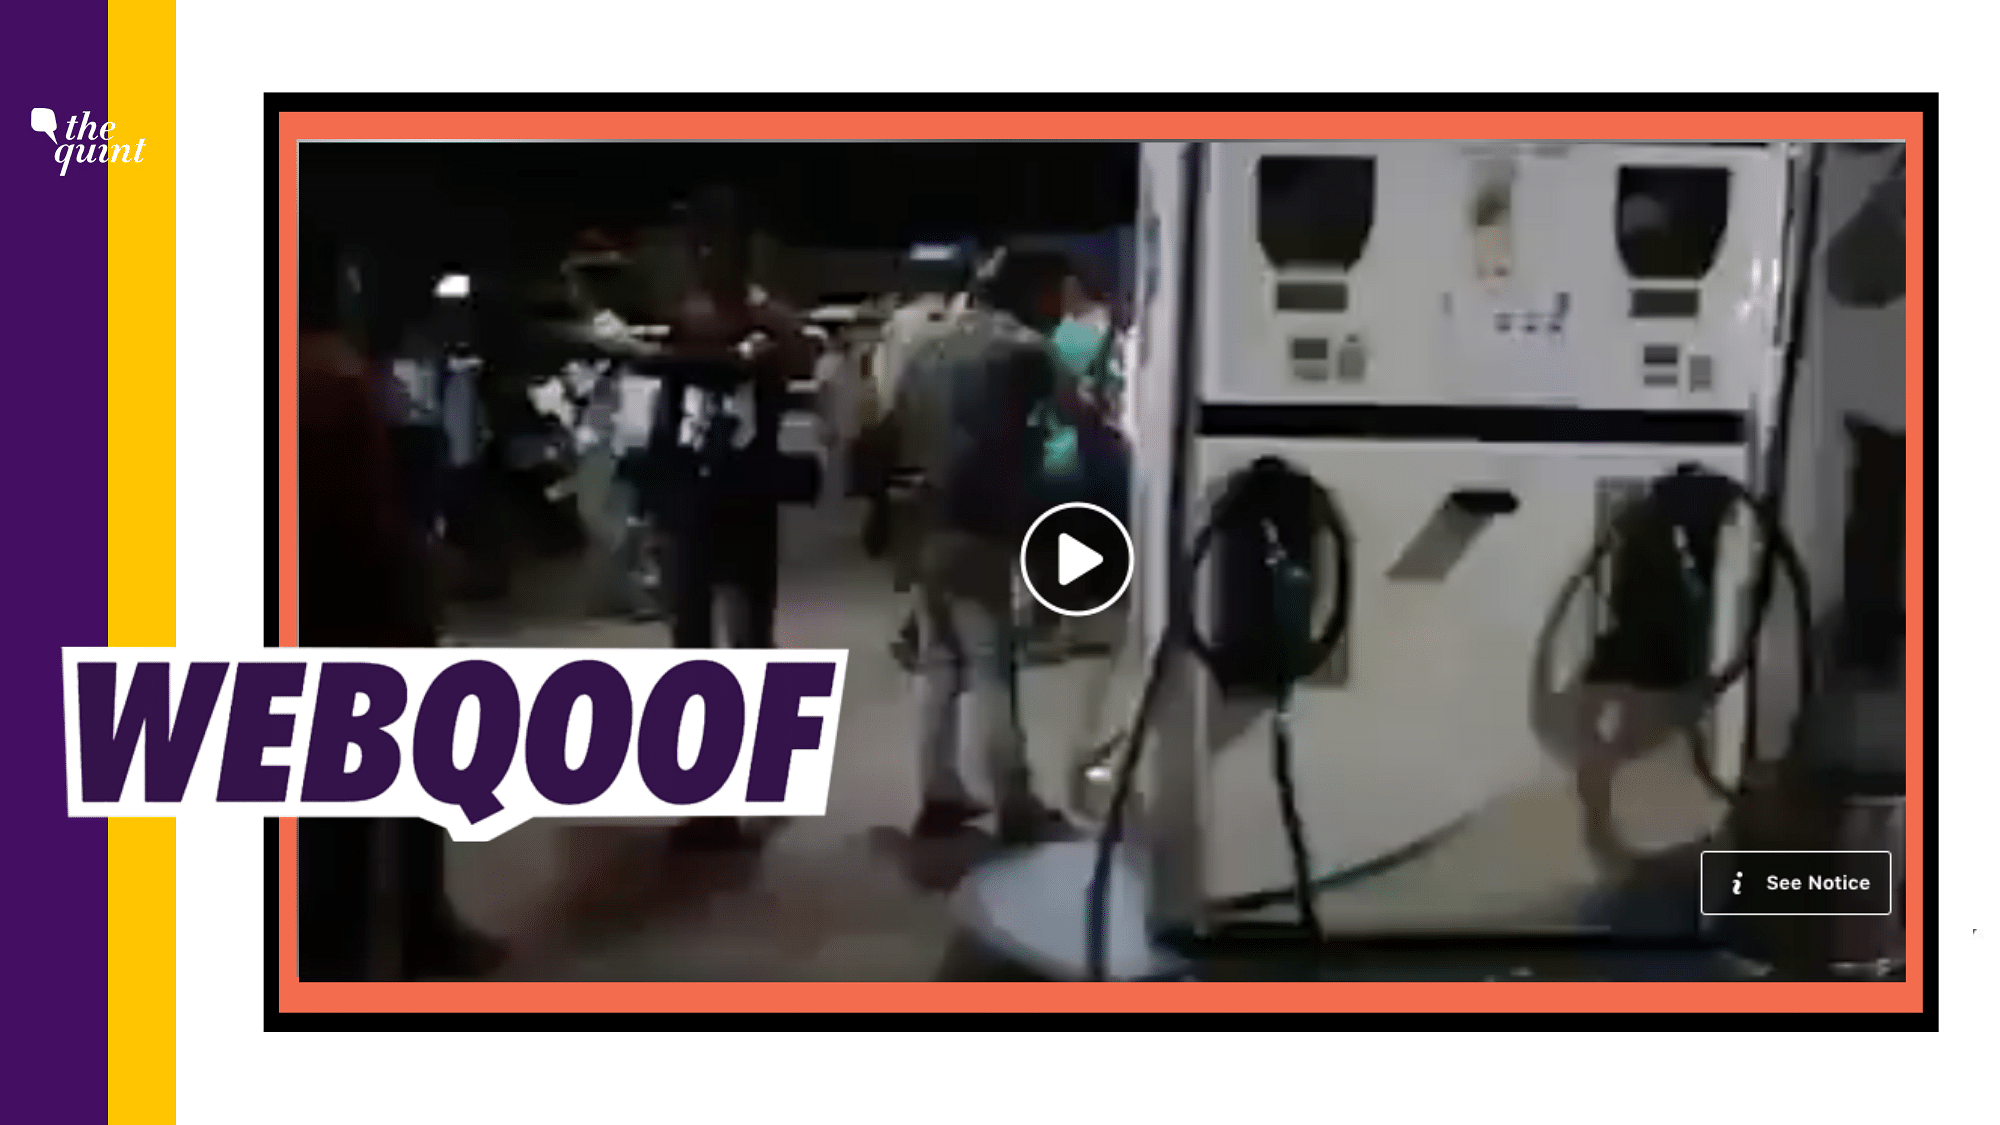 The two-minute clip shows a mob vandalising equipment seen in the petrol pump, shouting and creating chaos.